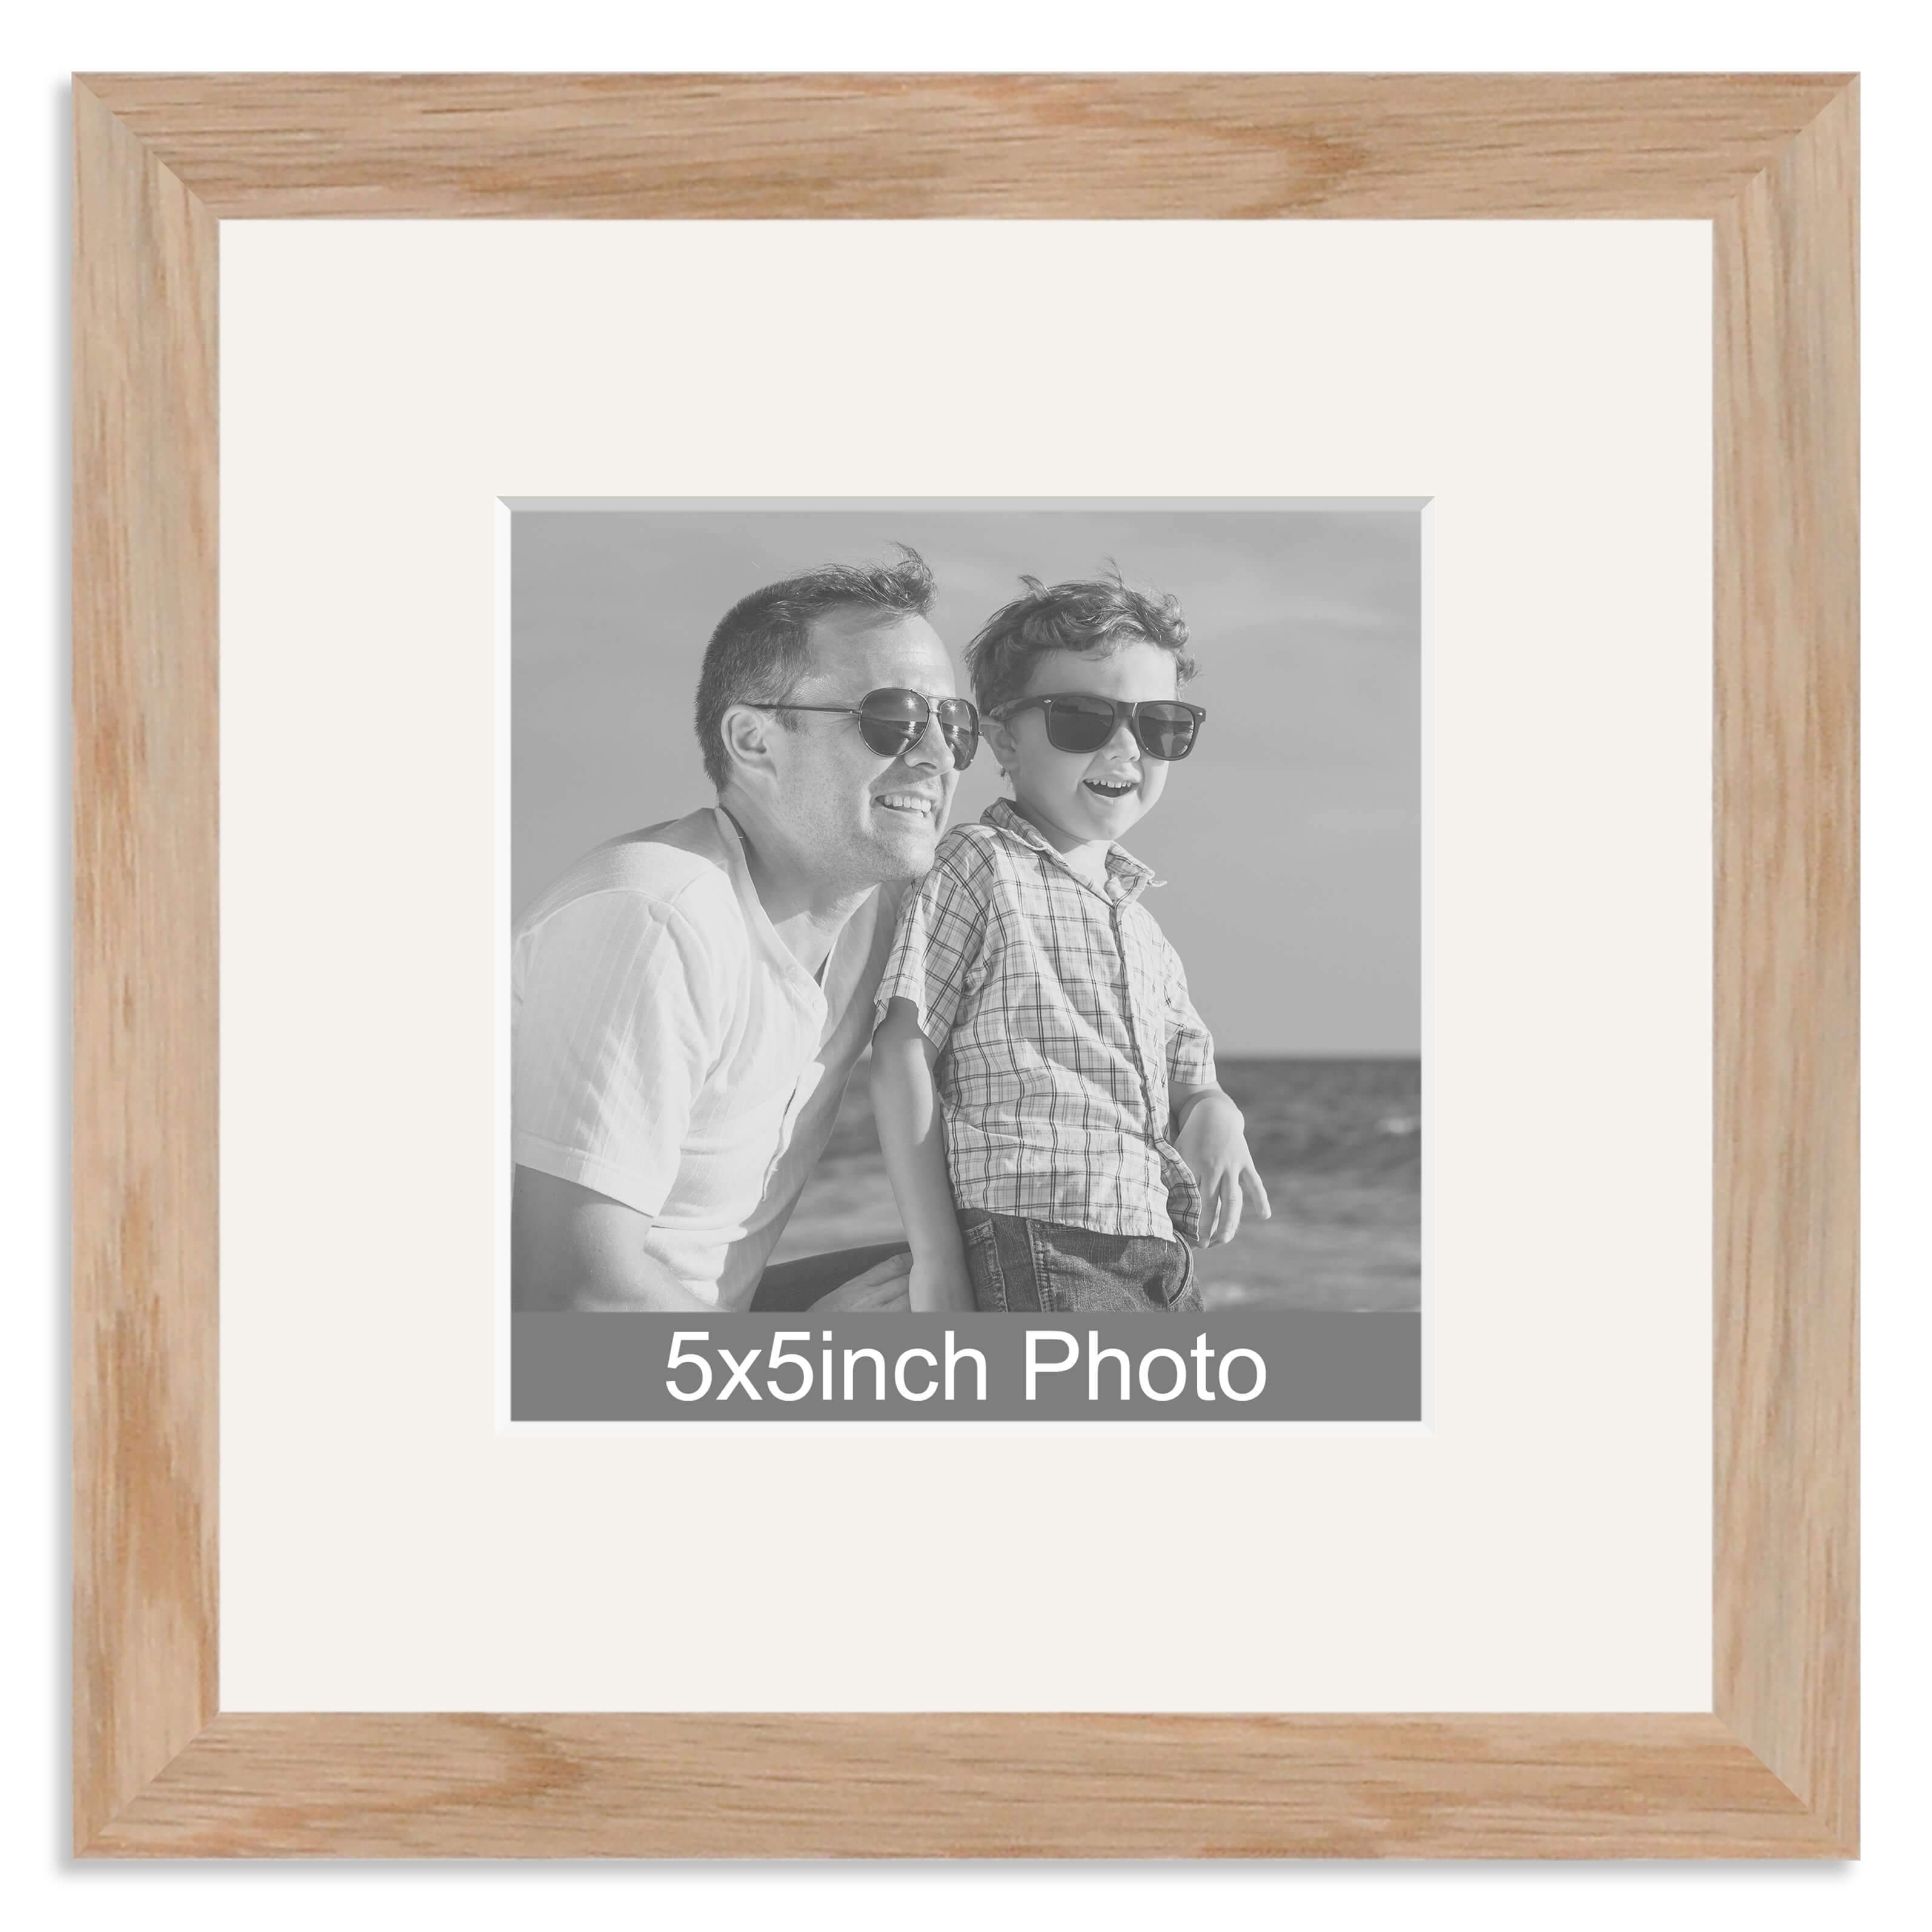 Solid Oak Photo Frame with mount for a 5x5in Photo – Photo to follow by email